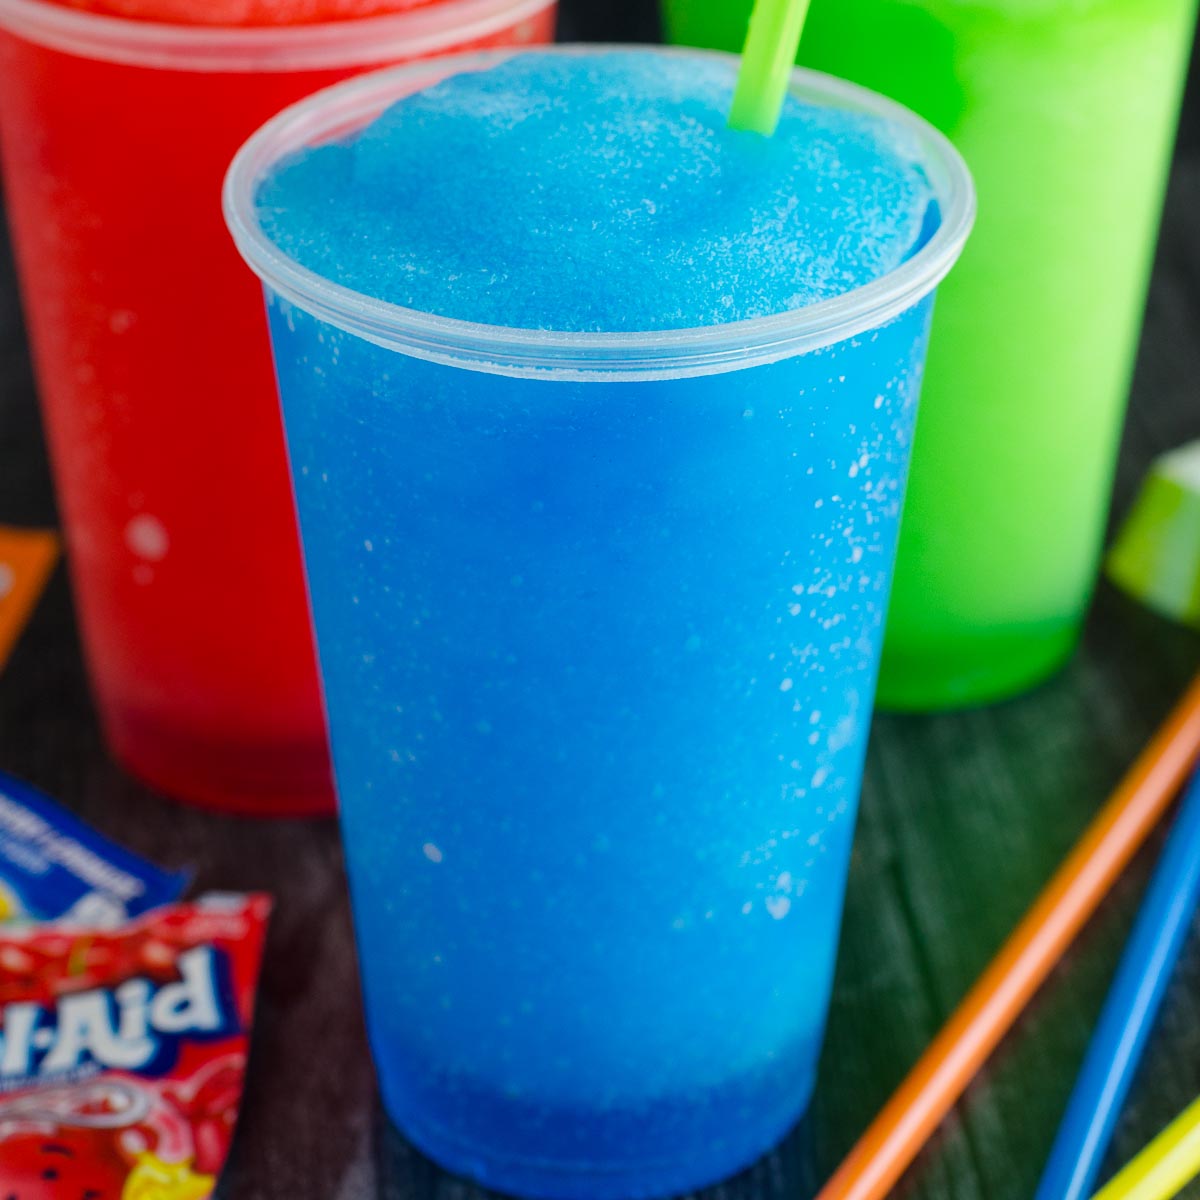 Classic slushie in a white cup with straw